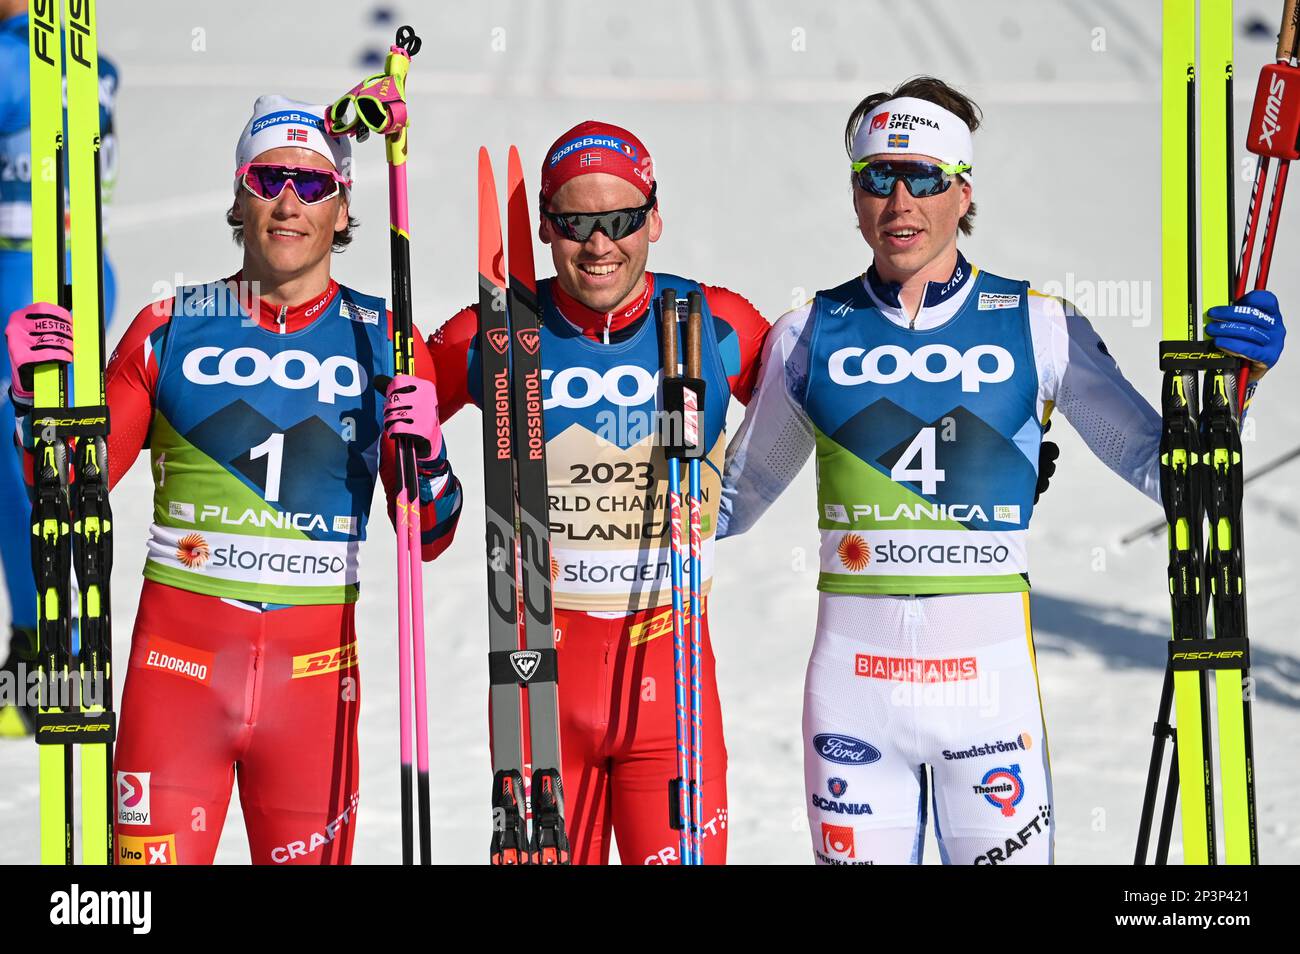 Planica, Slovenia. 5 March, 2023.  Medalists in the men’s 50-kilometer classic race at the 2023 FIS World Nordic Ski Championships in Planica, Slovenia. From left, Johannes Hoesflot Klaebo (second, Norway); Paal Golberg (first, Norway); William Poromaa (third, Sweden). Credit: John Lazenby/Alamy Live News Stock Photo